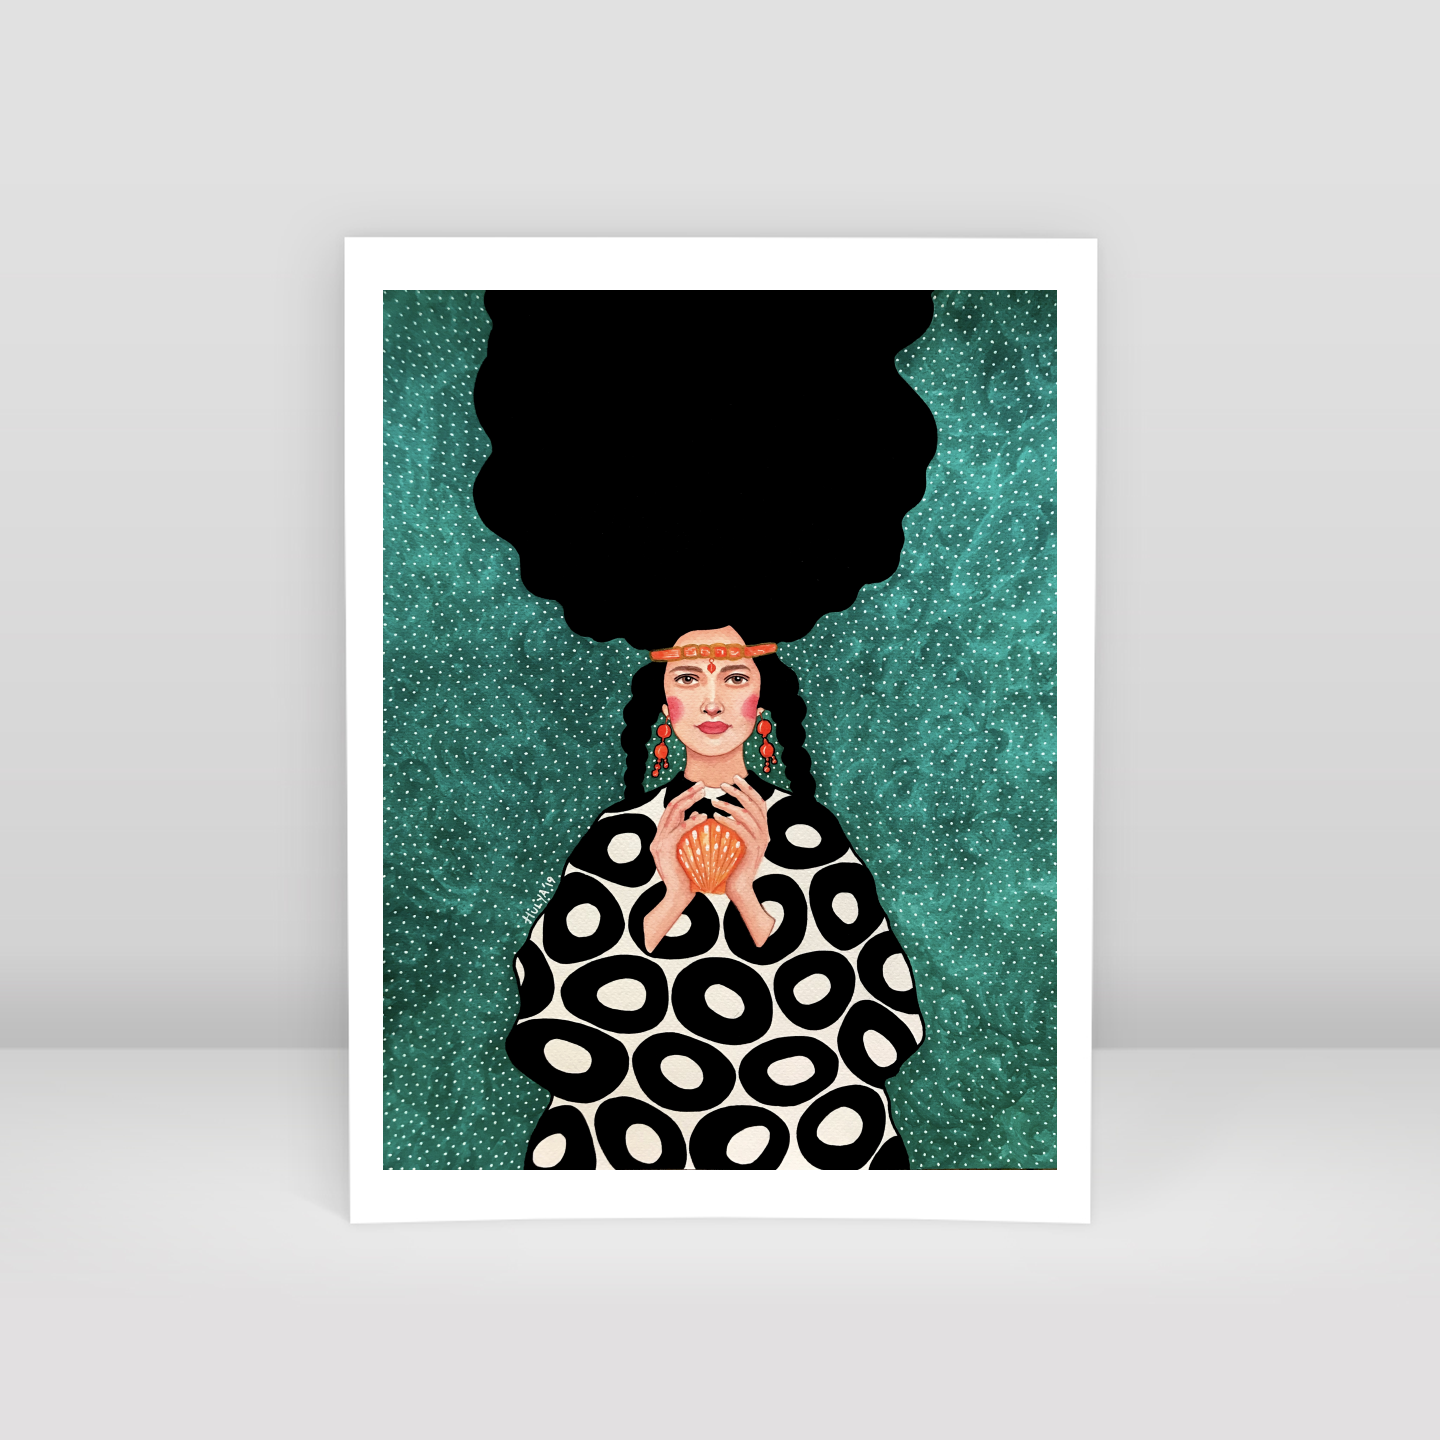 all of you concerned - Art Print